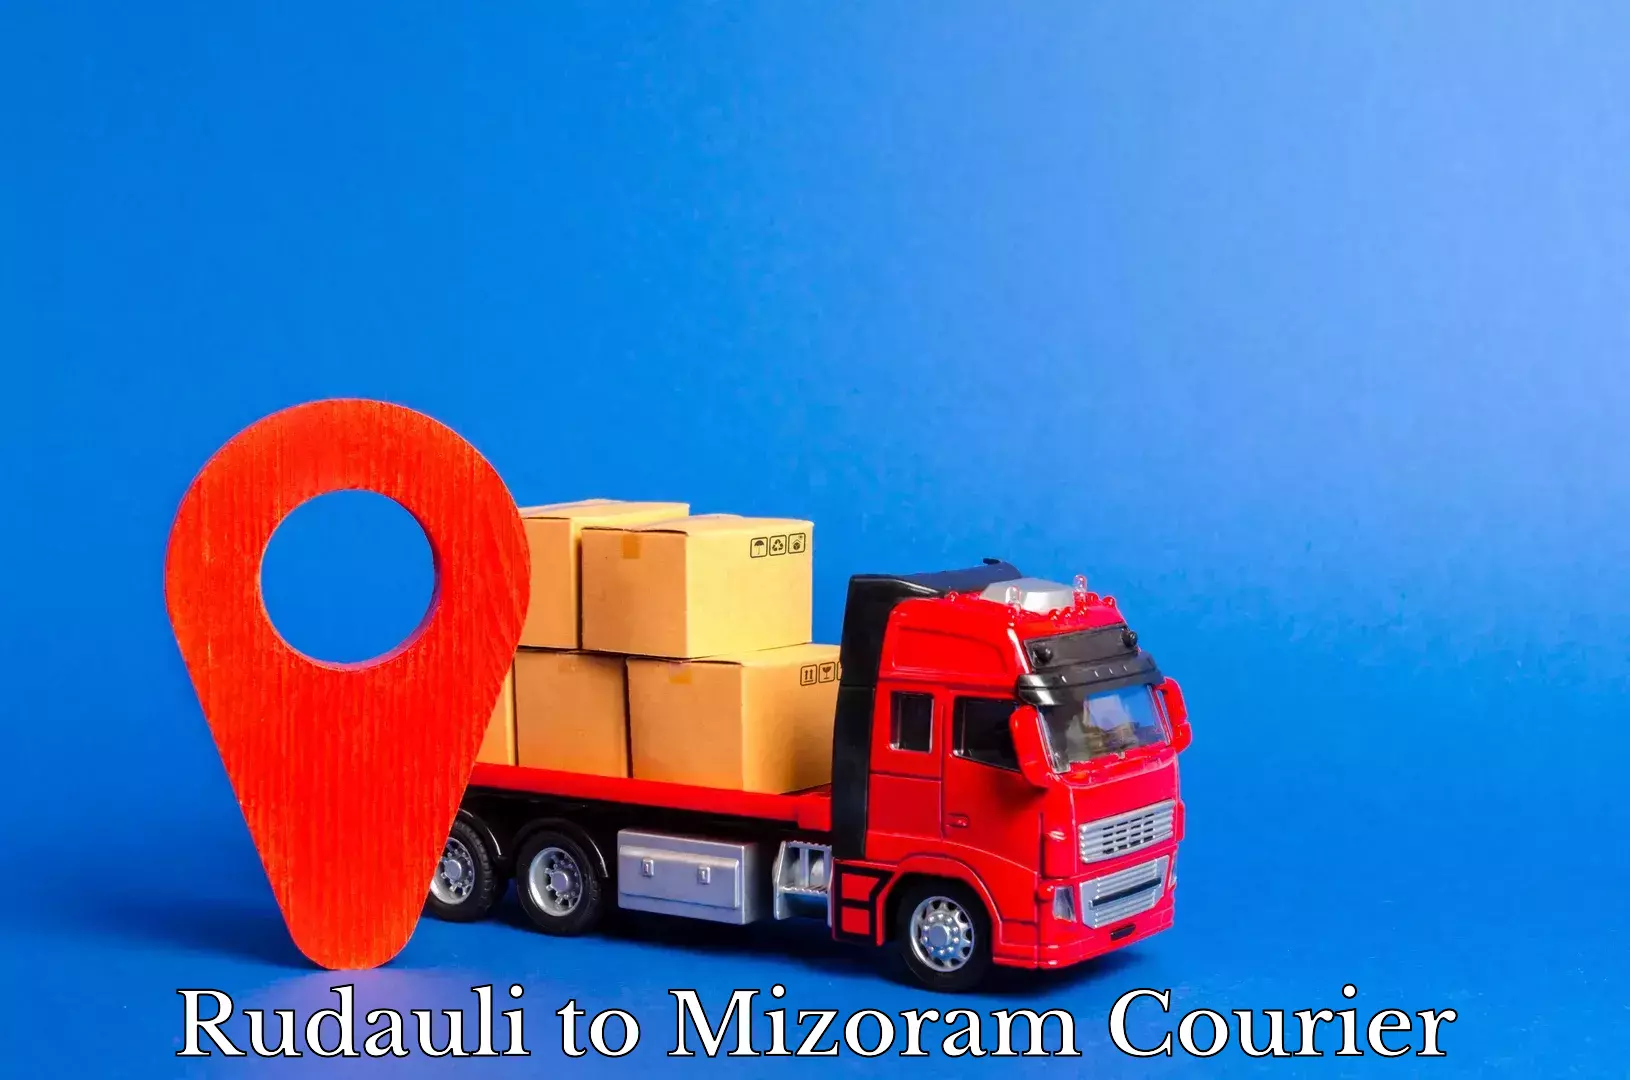 State-of-the-art courier technology Rudauli to Mizoram